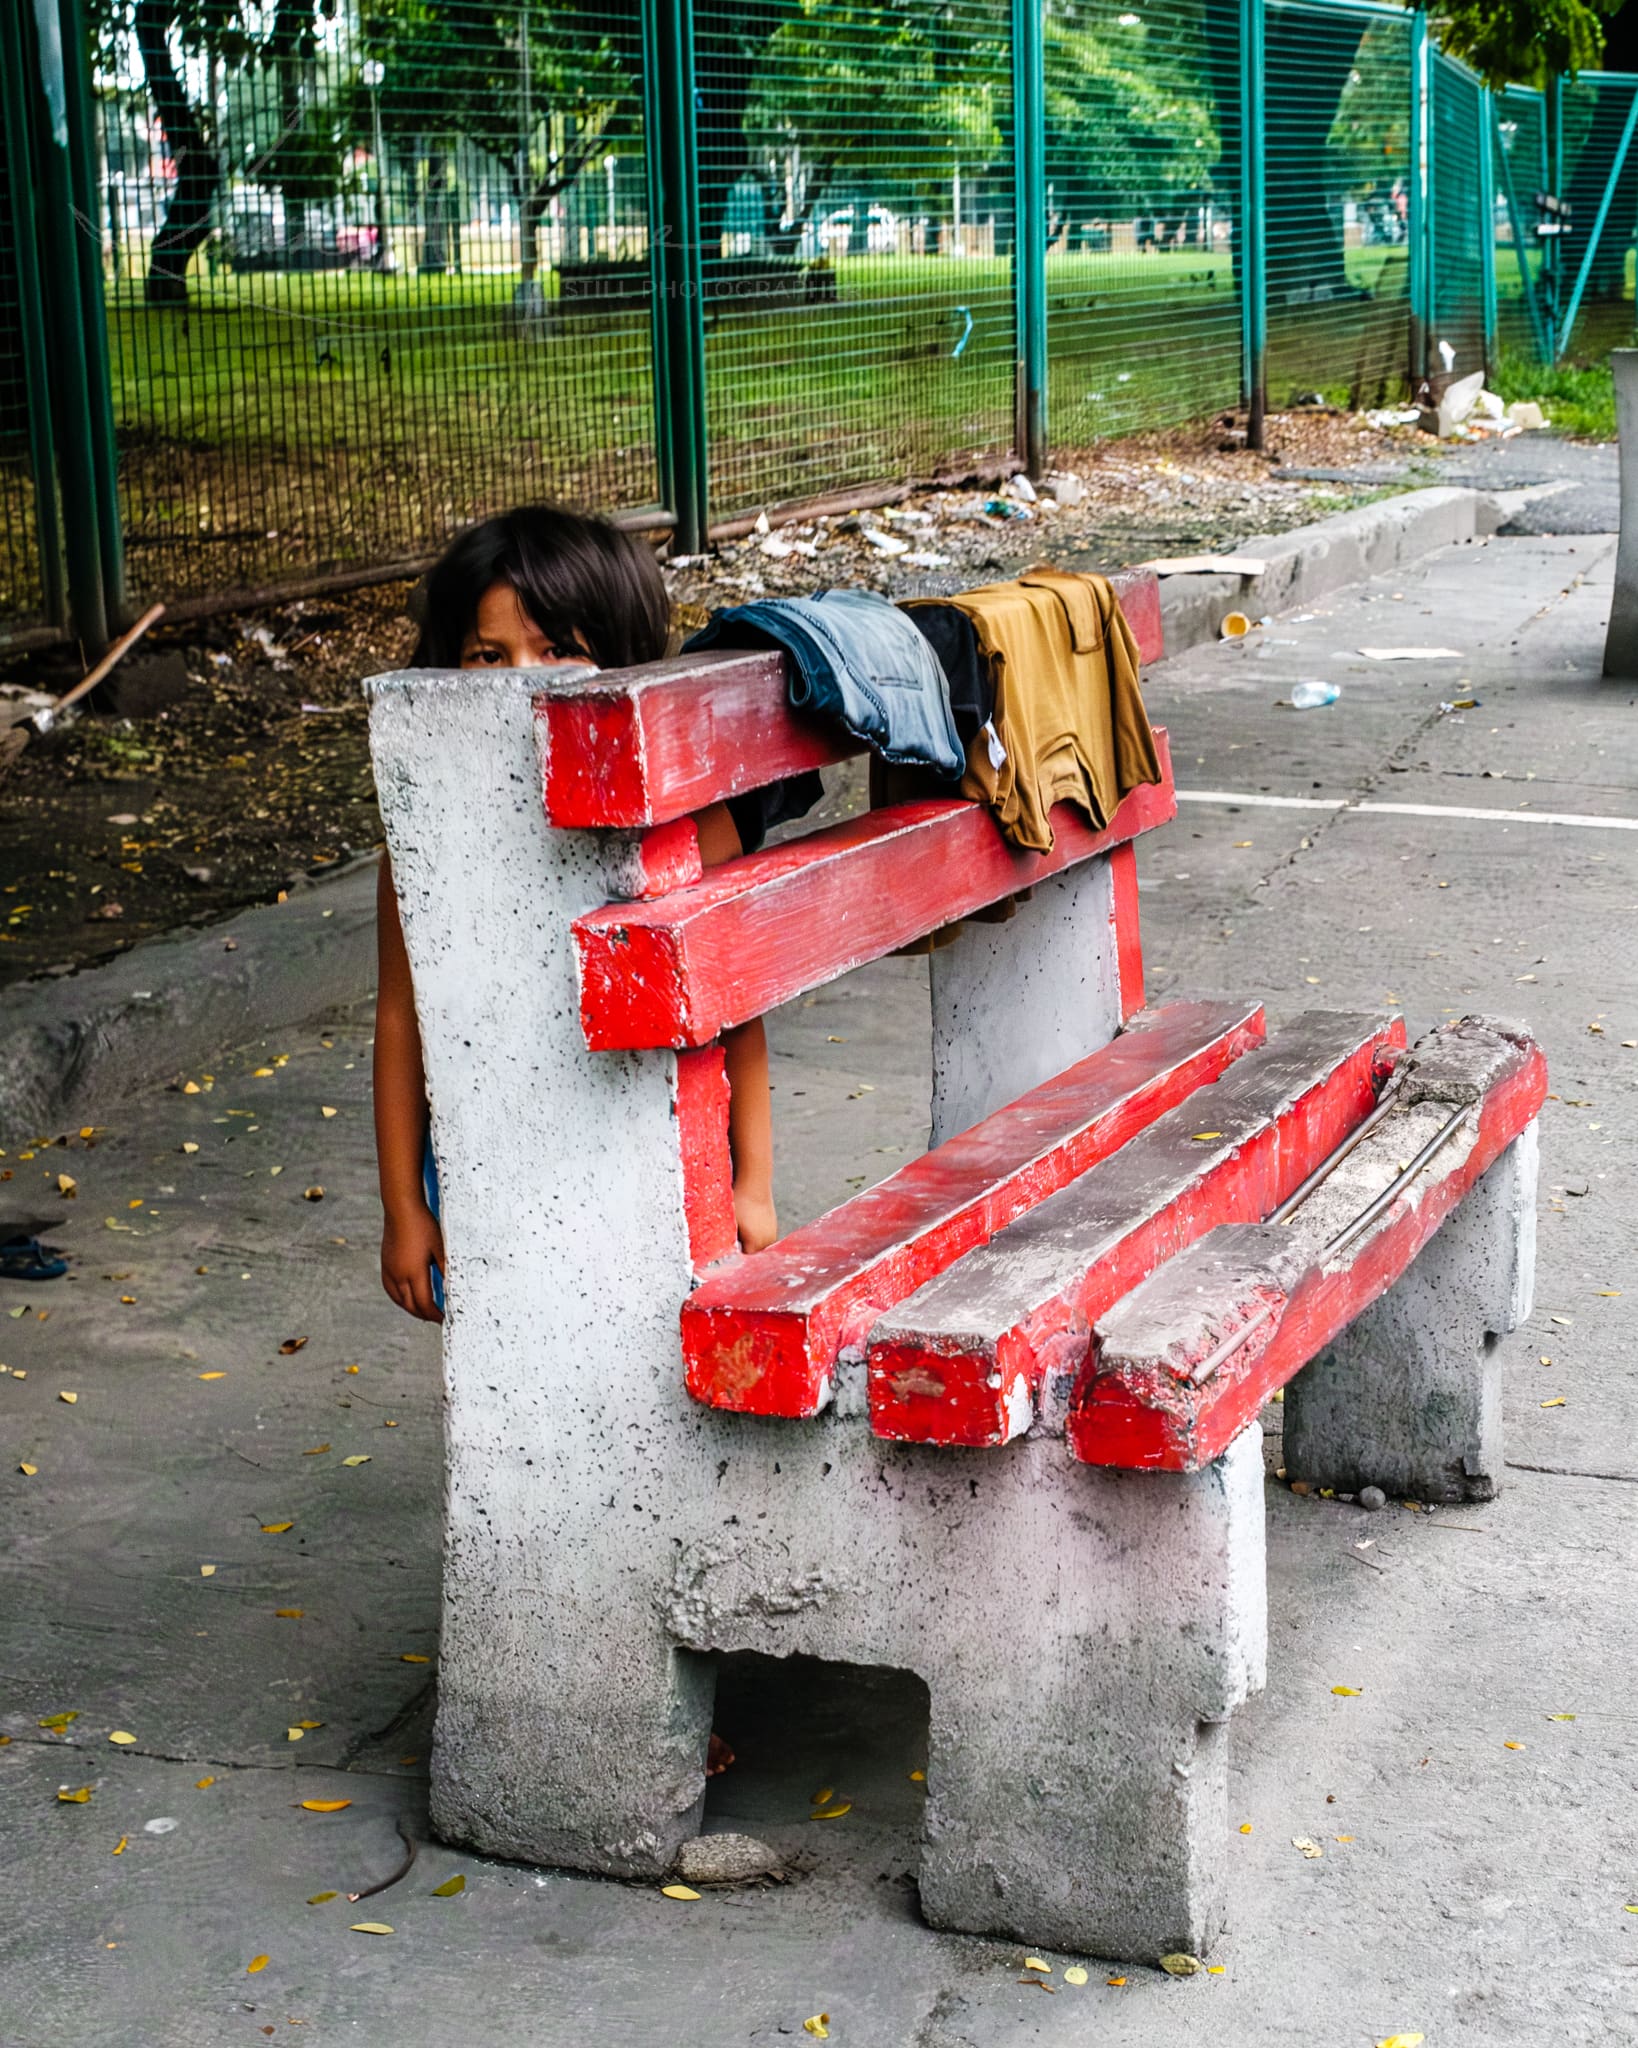 Child peeking from behind a neglected urban park bench with clothes draped over it.